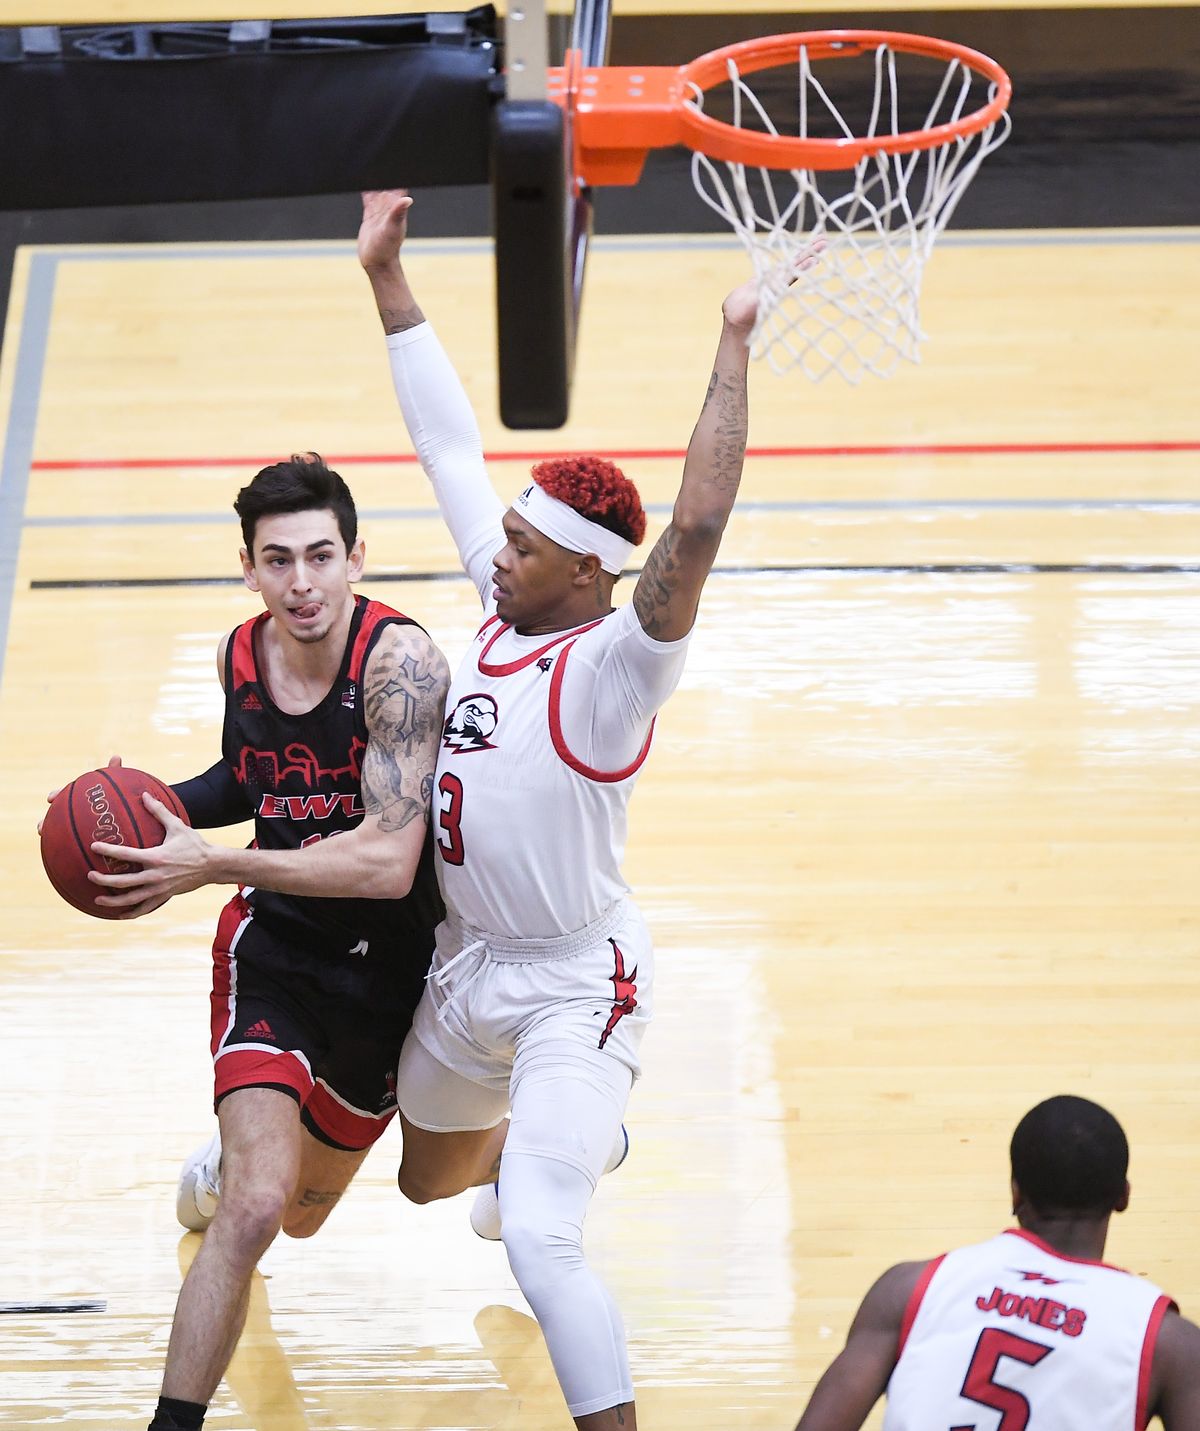 Eastern Washington Eagles guard Jacob Davison (10) drives to the hoop against Southern Utah Thunderbirds guard John Knight III (3) during the first half of a college basketball game on Saturday, January 16, 2021, at Reese Court in Cheney, Wash.  (Tyler Tjomsland/THE SPOKESMAN-RE)